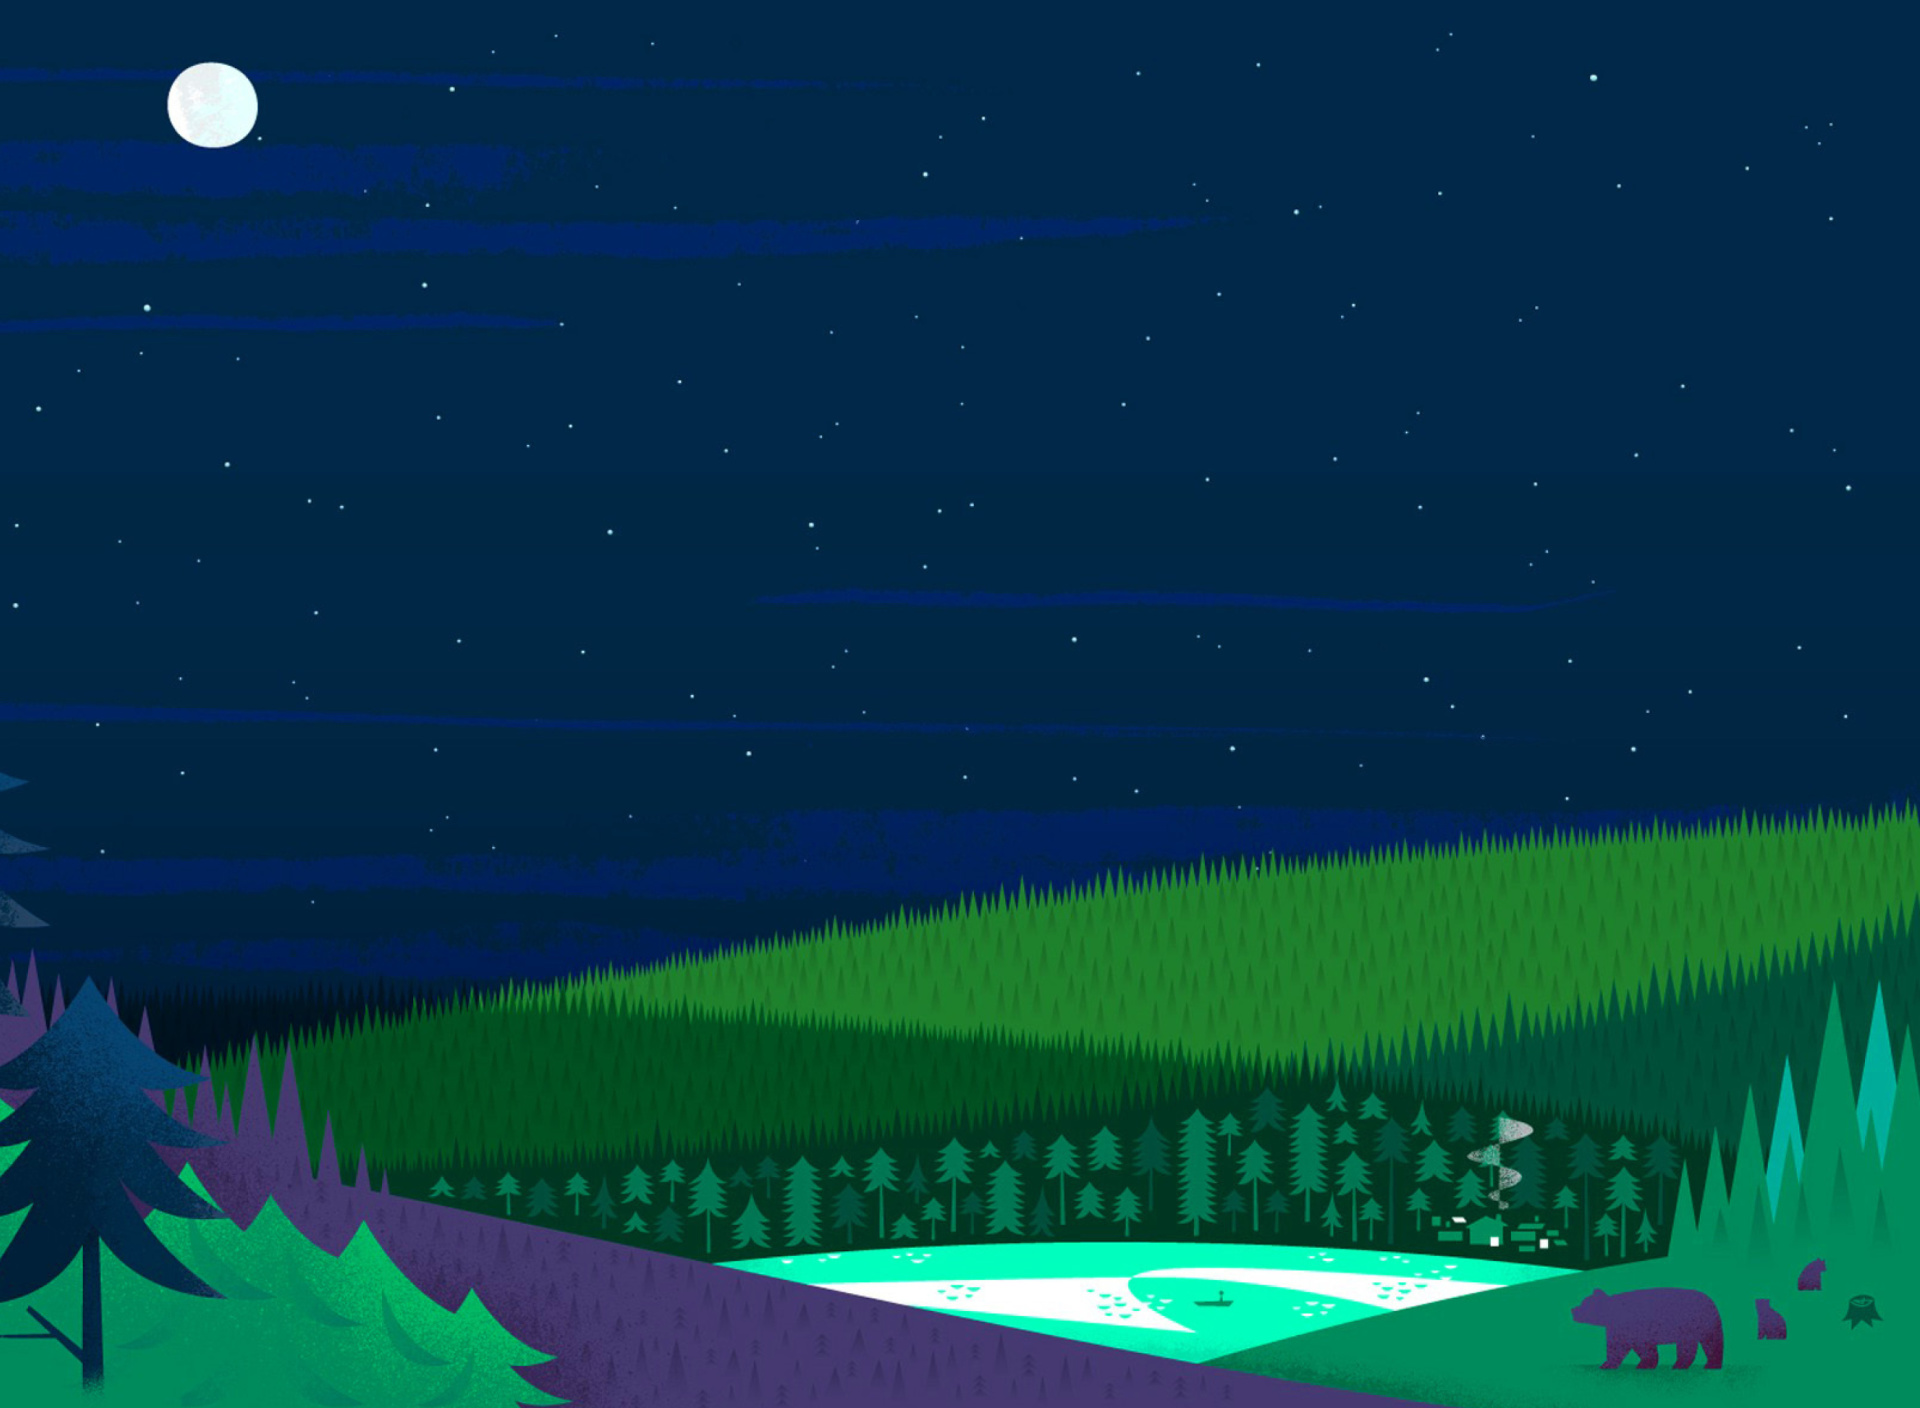 Das Graphics night and bears in forest Wallpaper 1920x1408